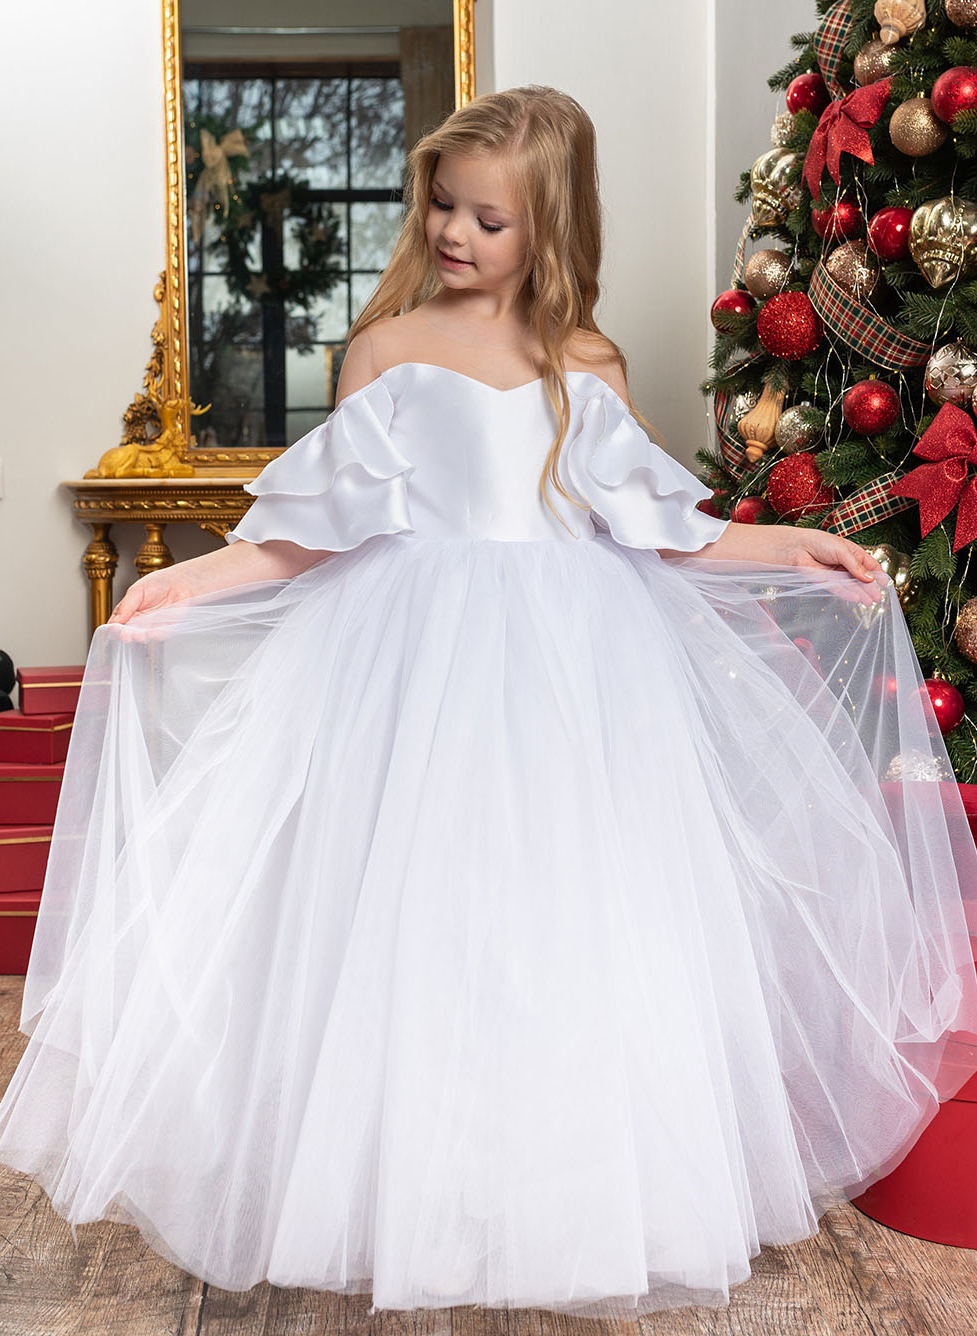 Ball-Gown/Princess Floor-Length Flower Girl Dresses Pageant Dresses With Bow